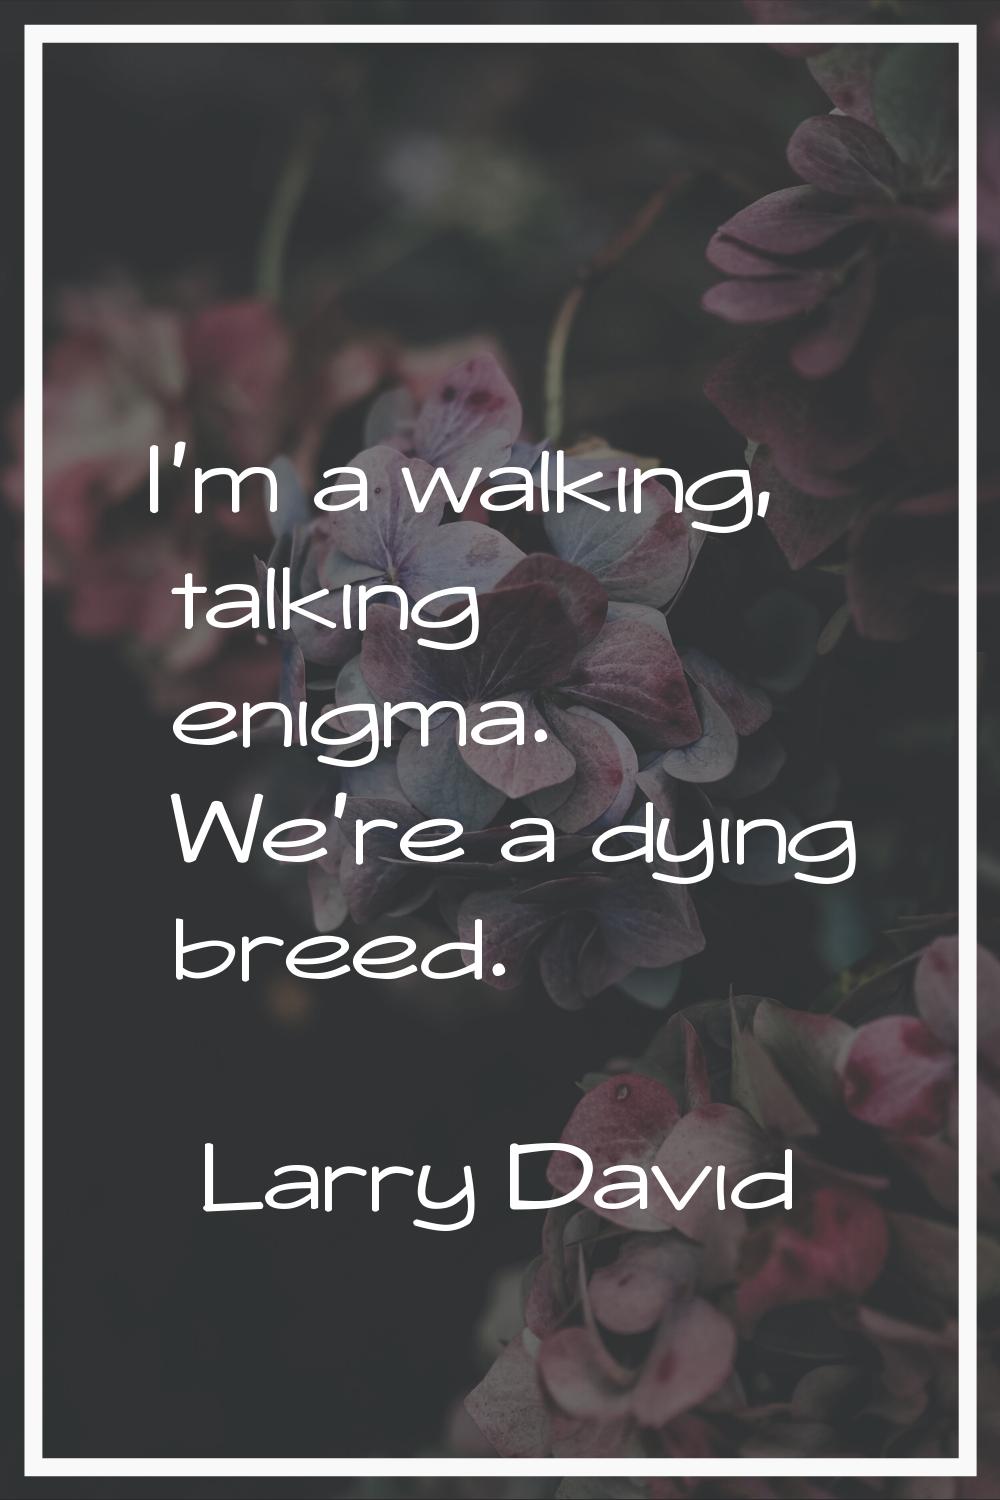 I'm a walking, talking enigma. We're a dying breed.